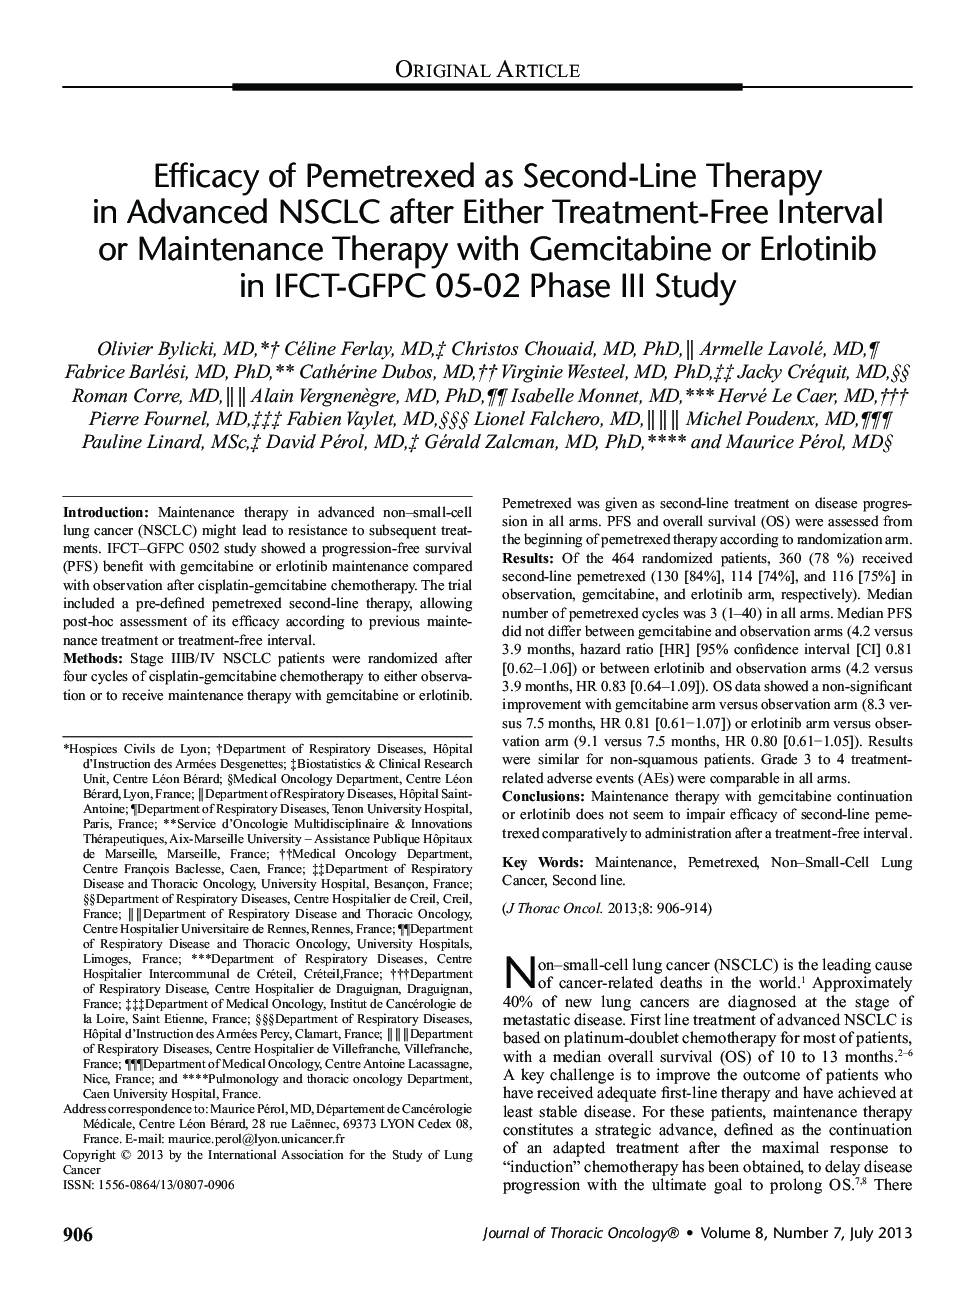 Efficacy of Pemetrexed as Second-Line Therapy in Advanced NSCLC after Either Treatment-Free Interval or Maintenance Therapy with Gemcitabine or Erlotinib in IFCT-GFPC 05-02 Phase III Study